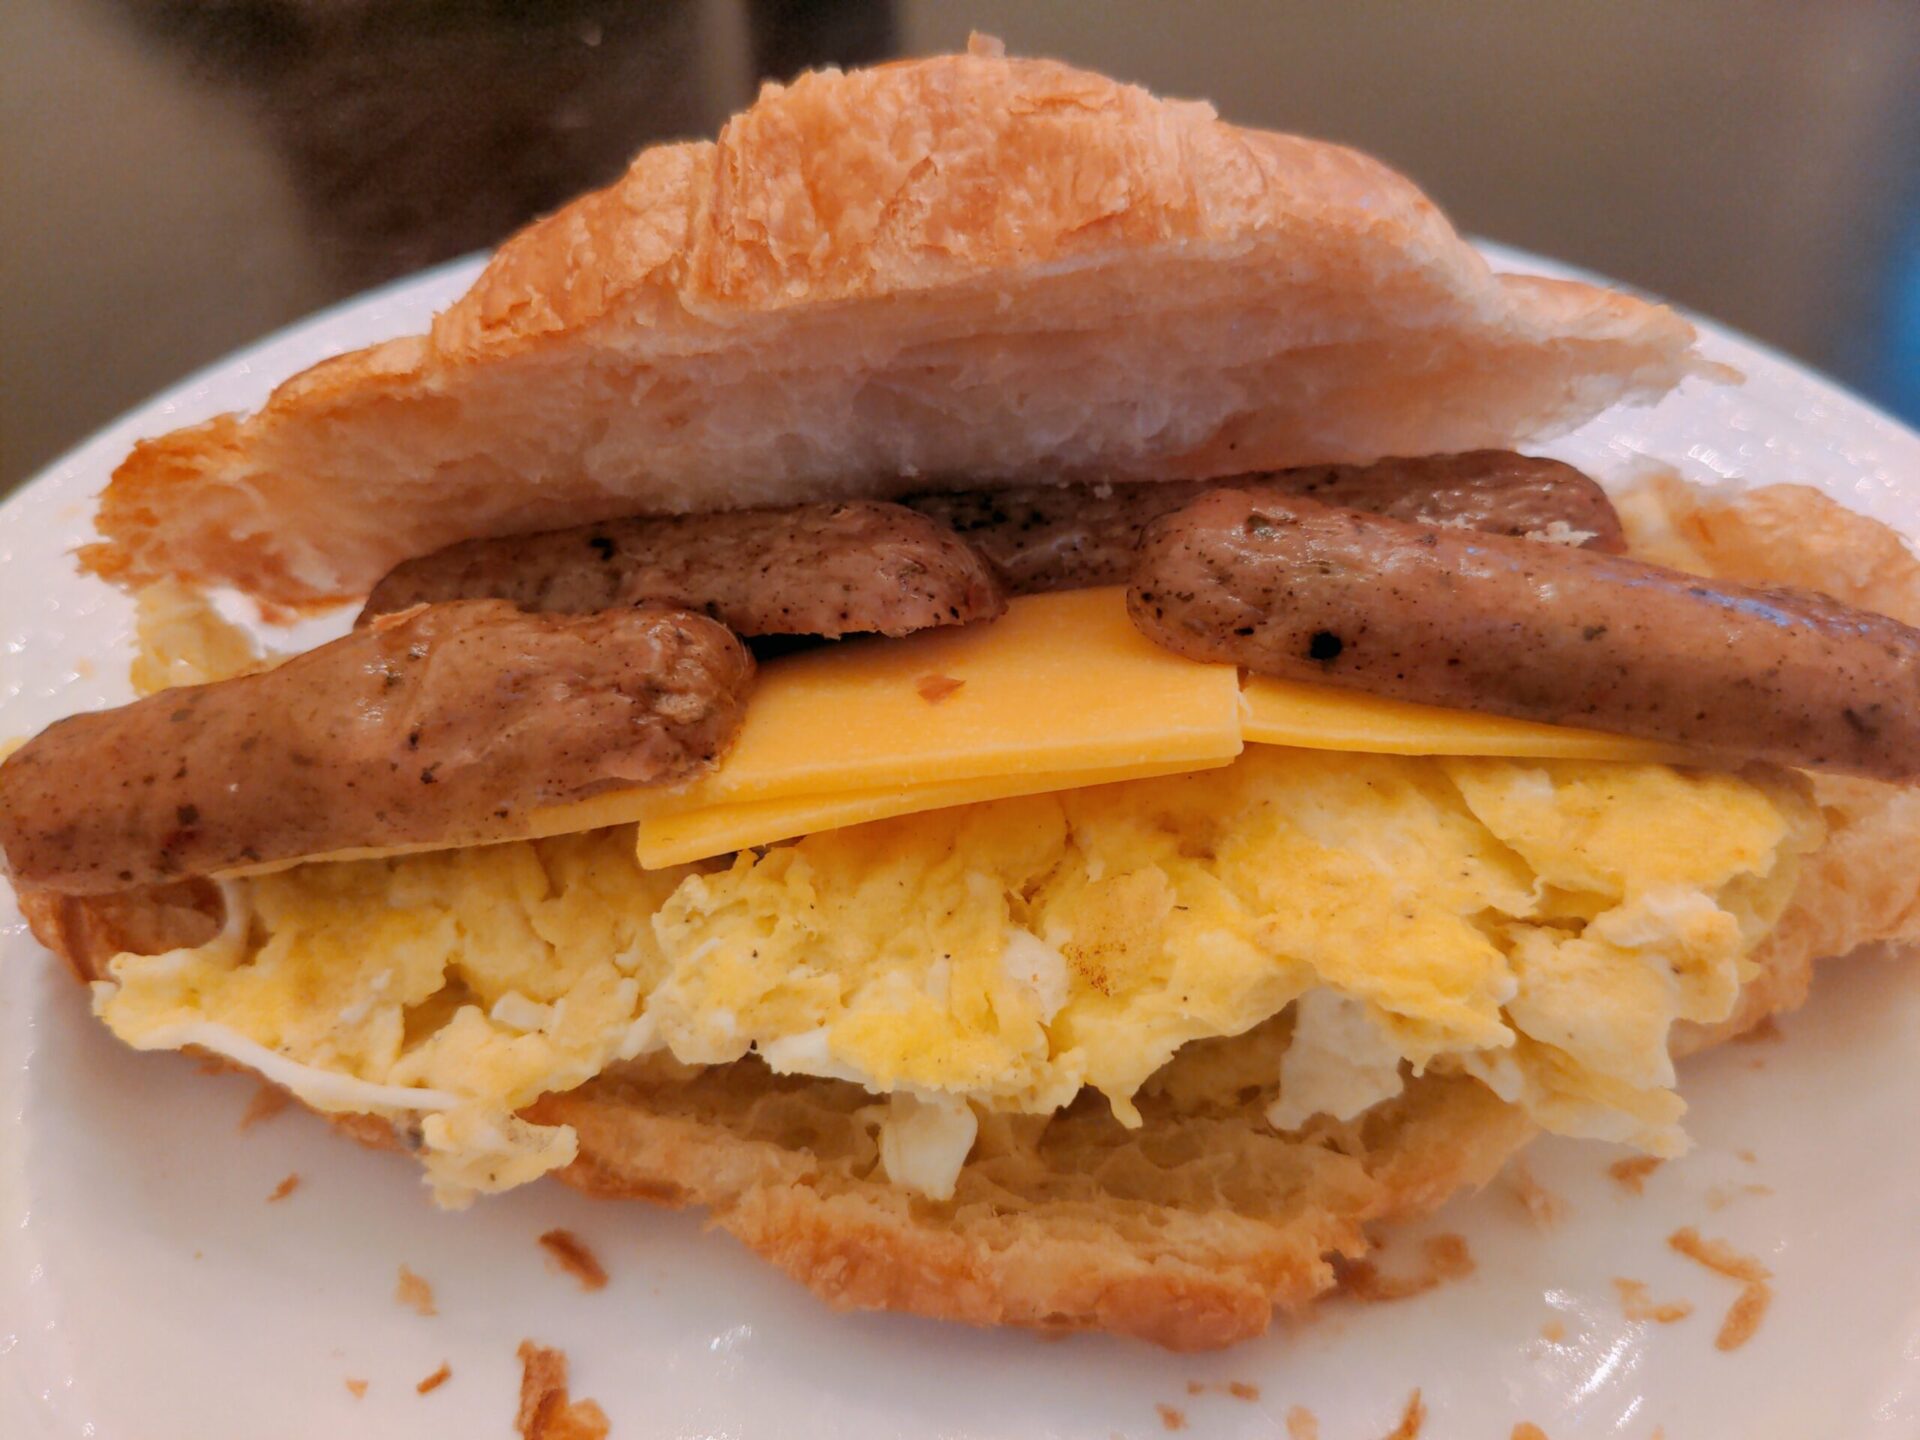 Costco croissant Homemade Sandwich scaled